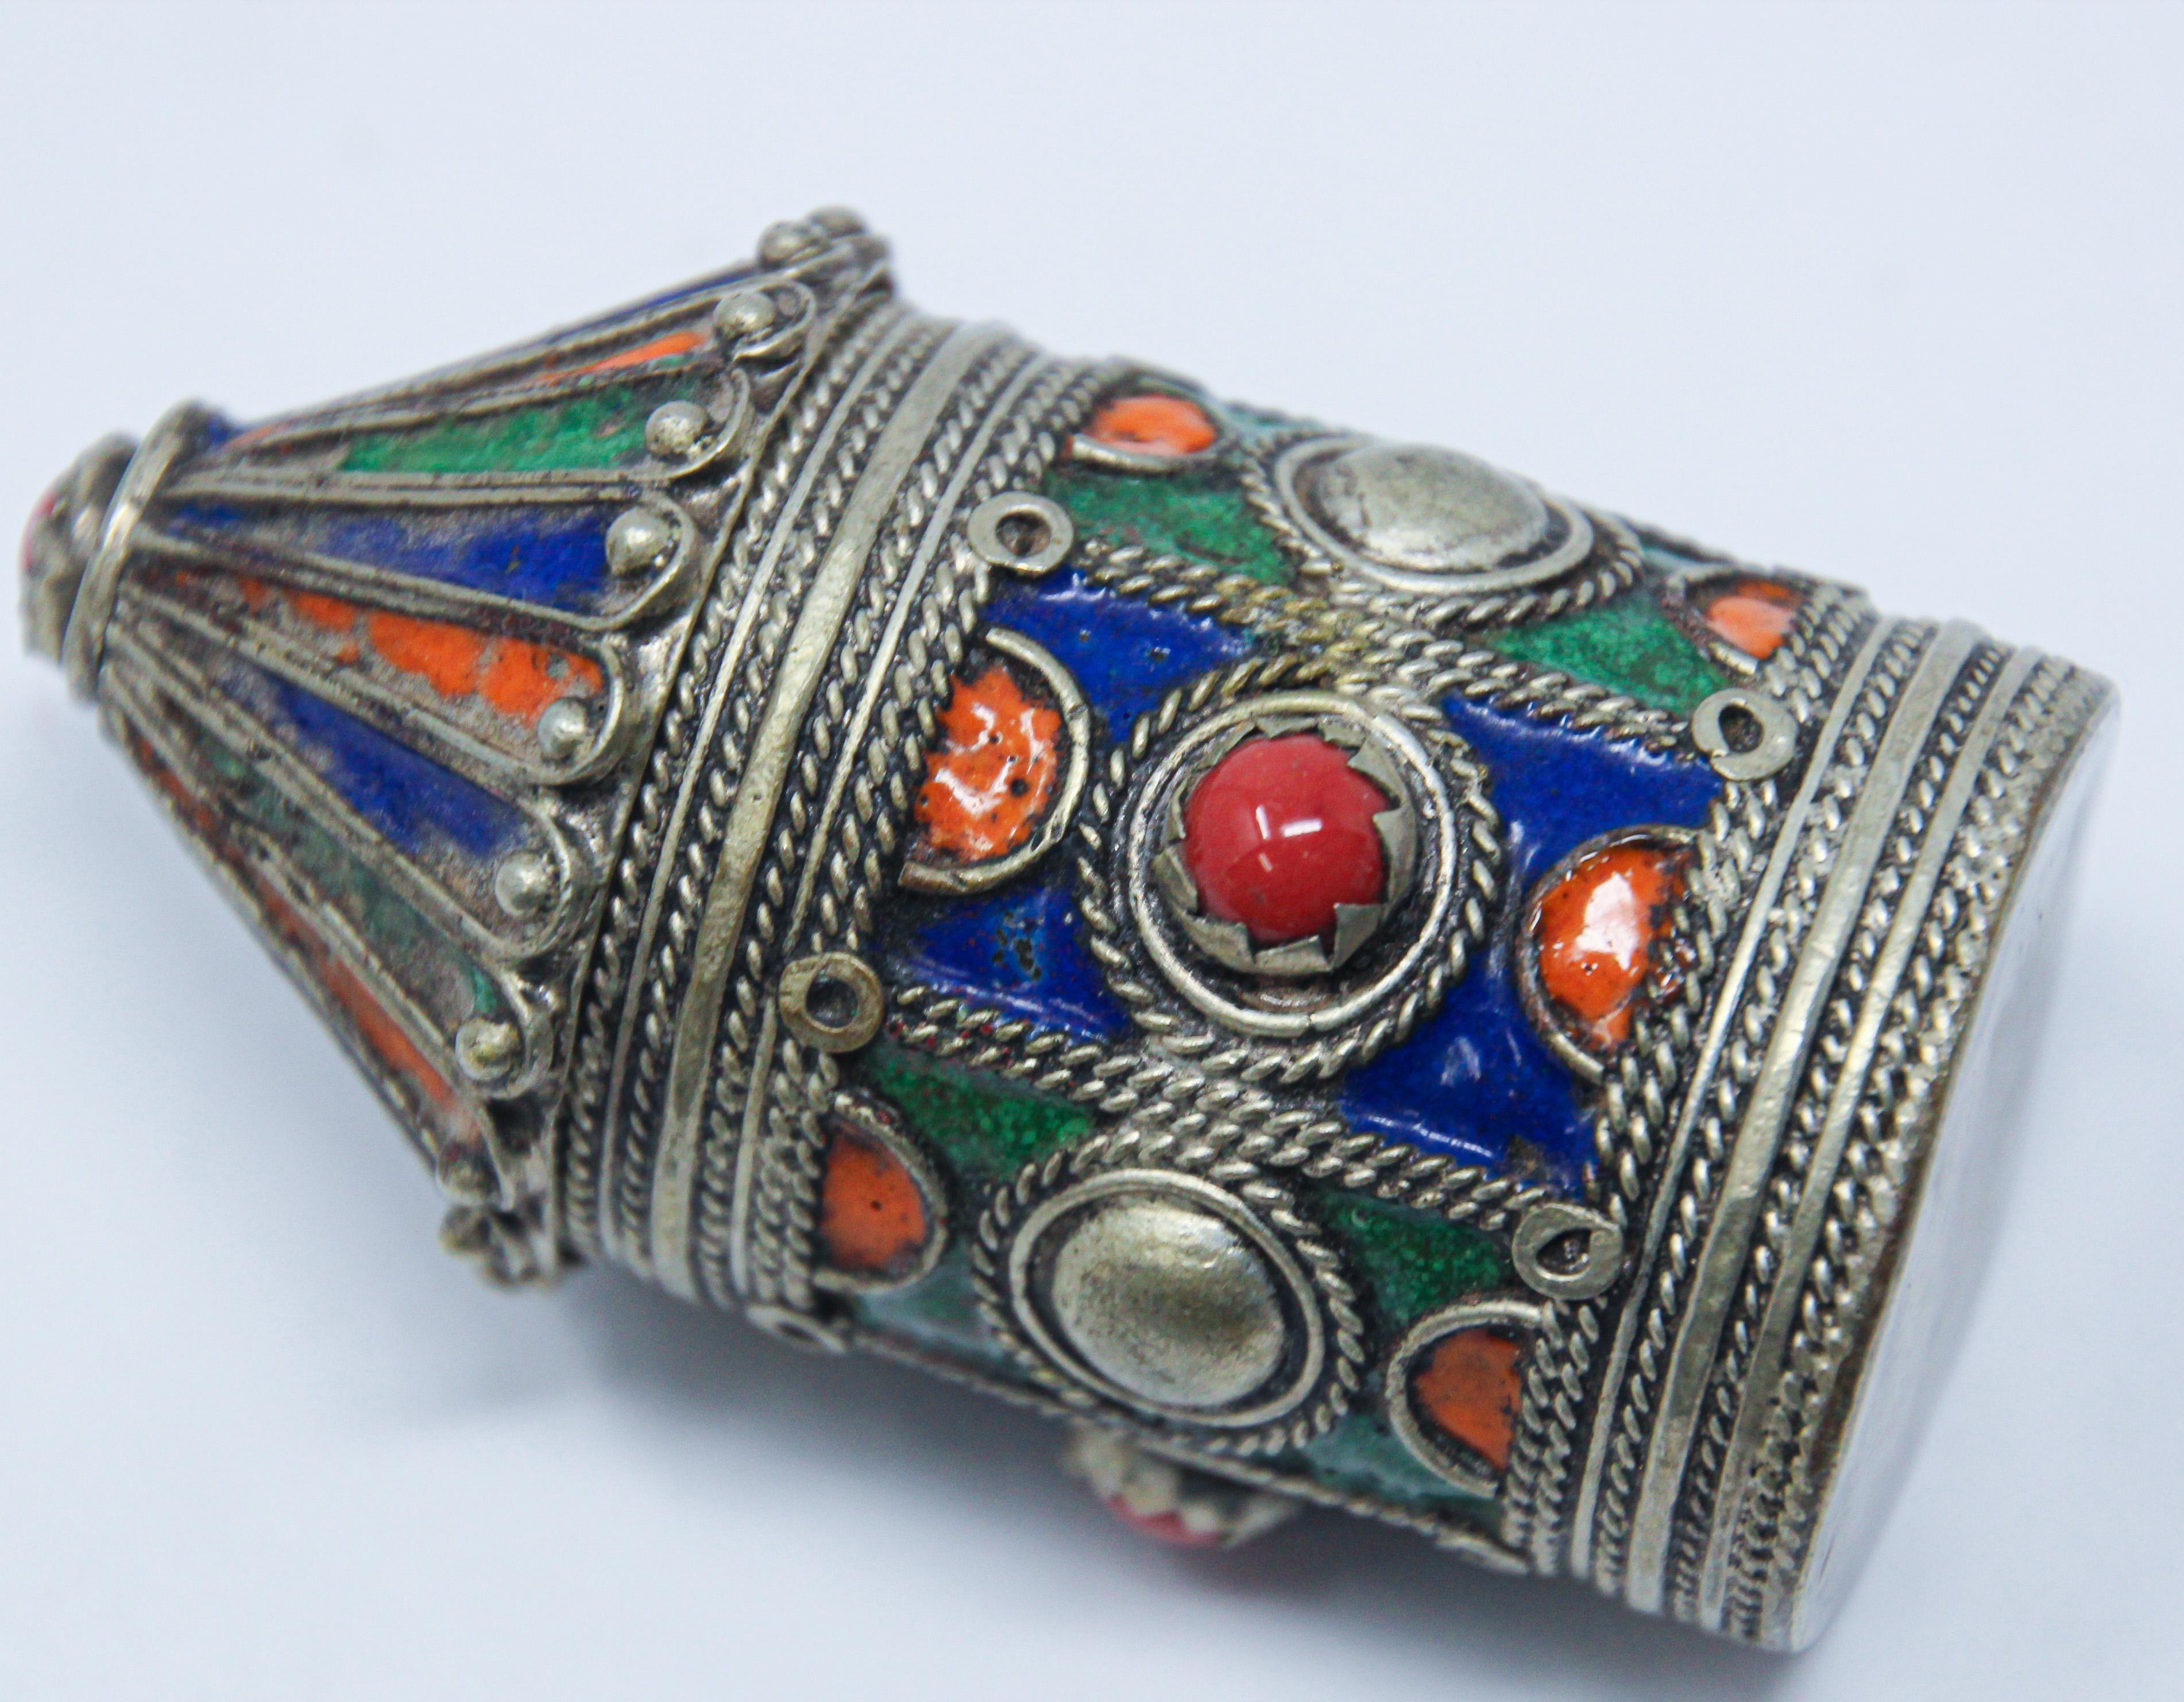 Antique Silver Enameled Powder Kohl Container Box from Kabylie, Algeria For Sale 1